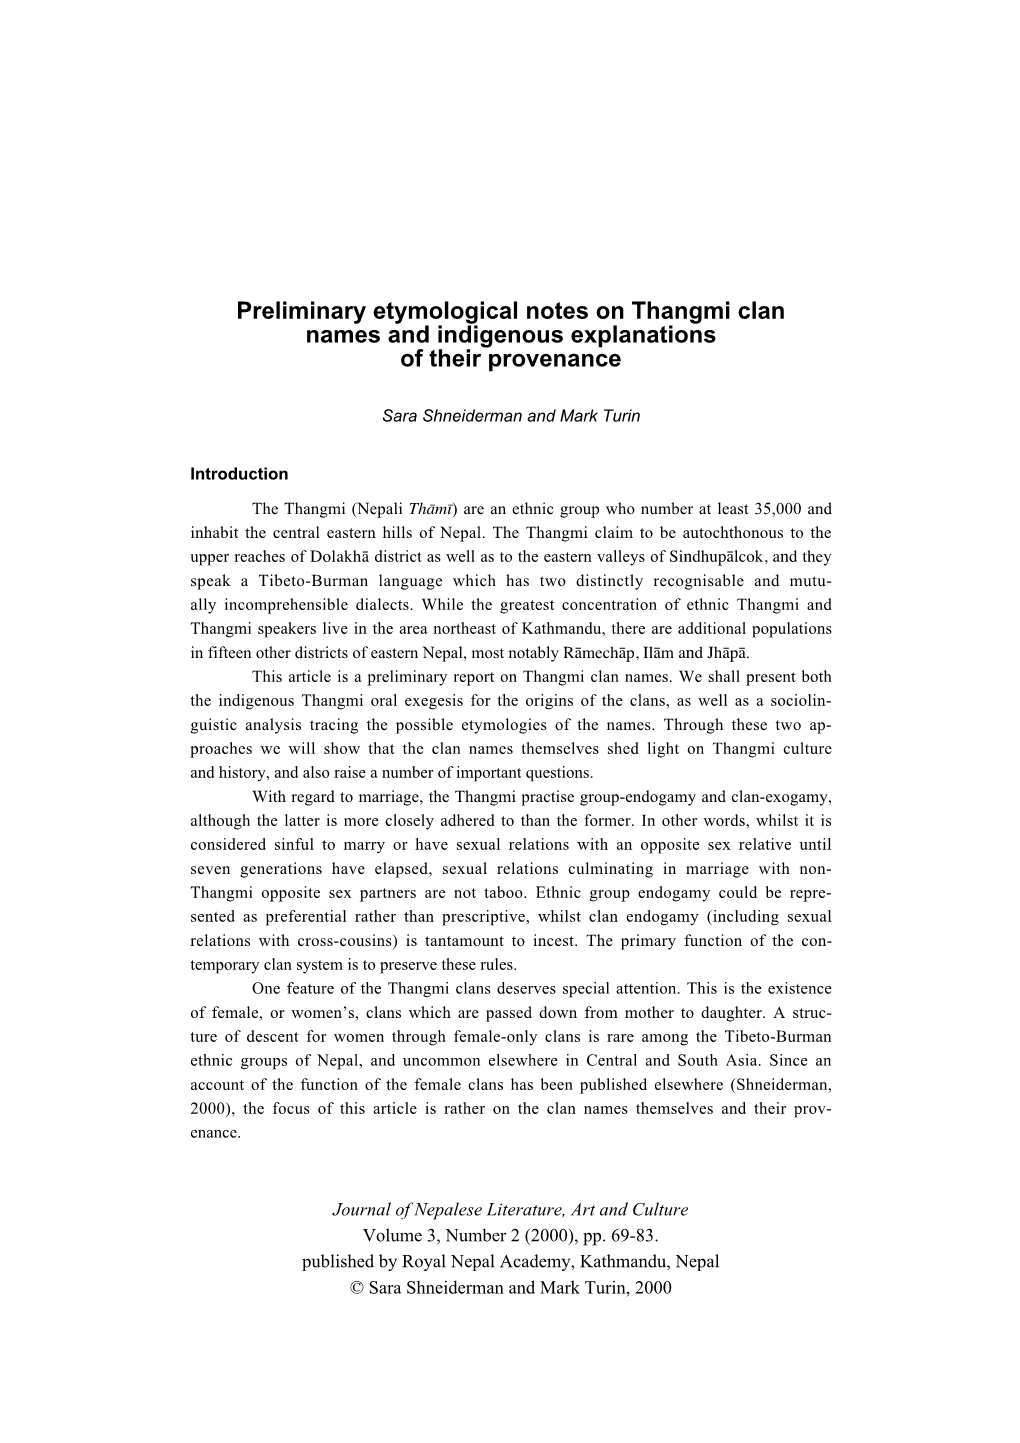 Preliminary Etymological Notes on Thangmi Clan Names and Indigenous Explanations of Their Provenance